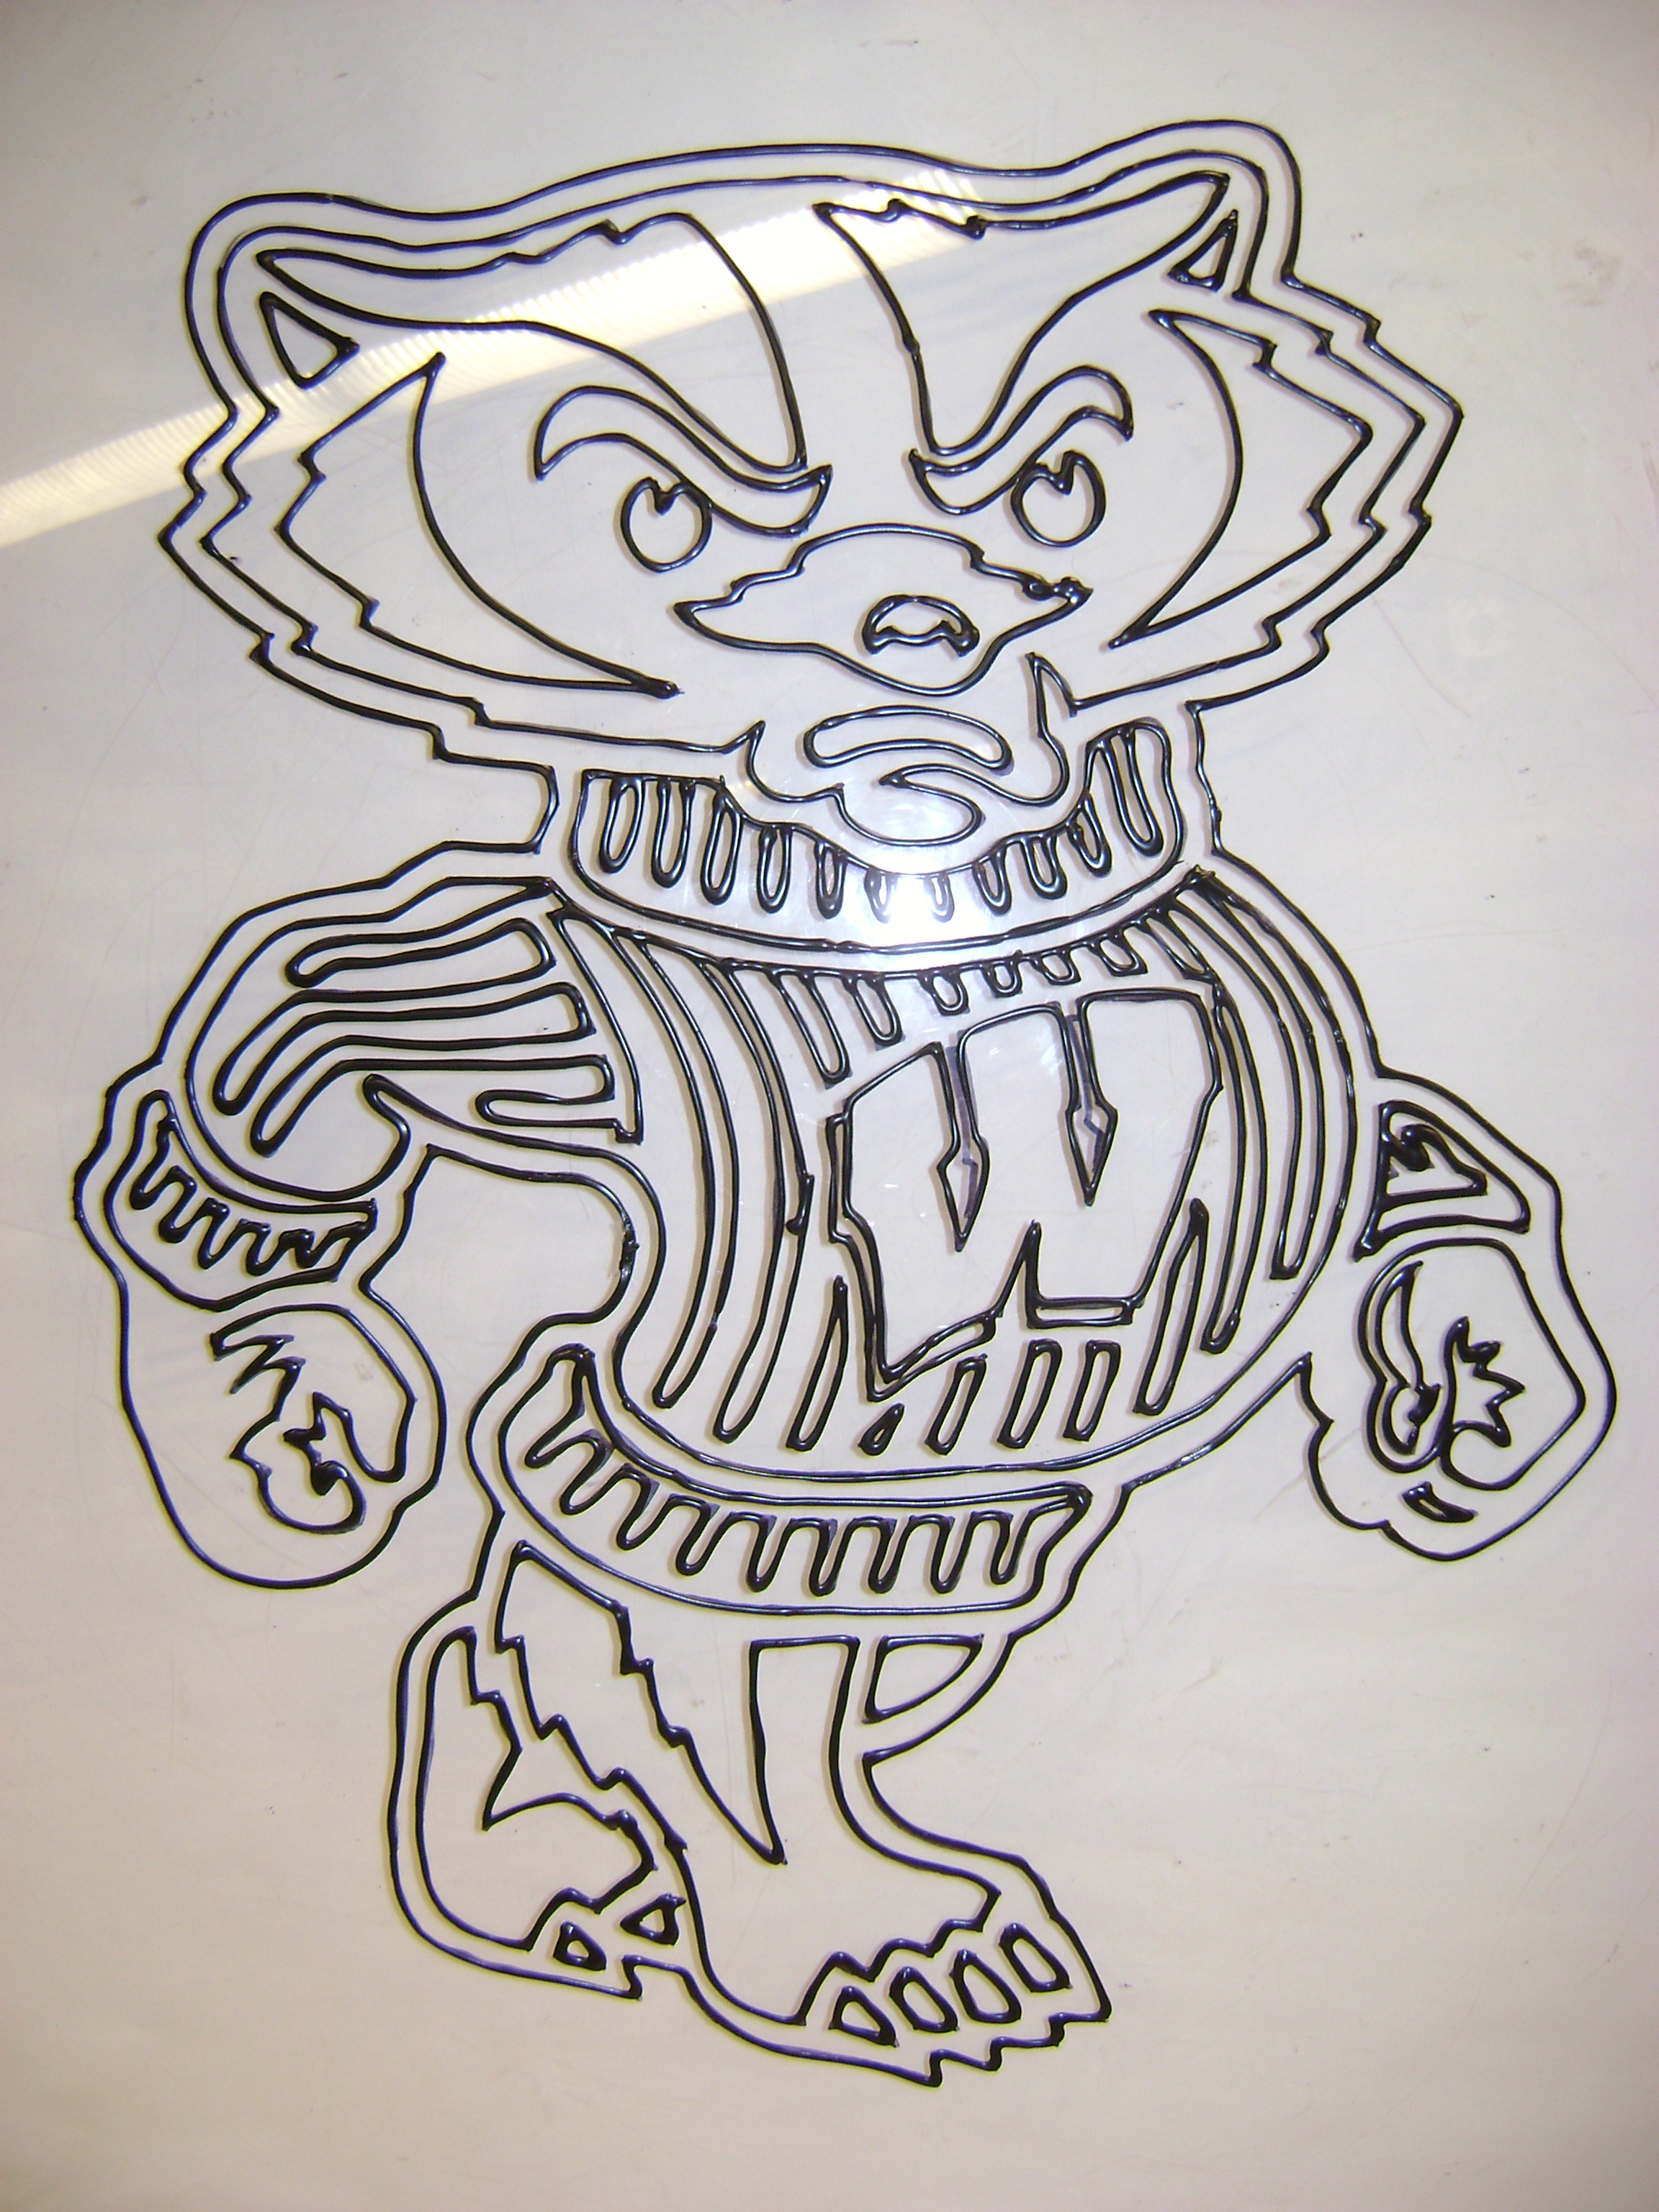 Image of Bucky Badger stained glass panel